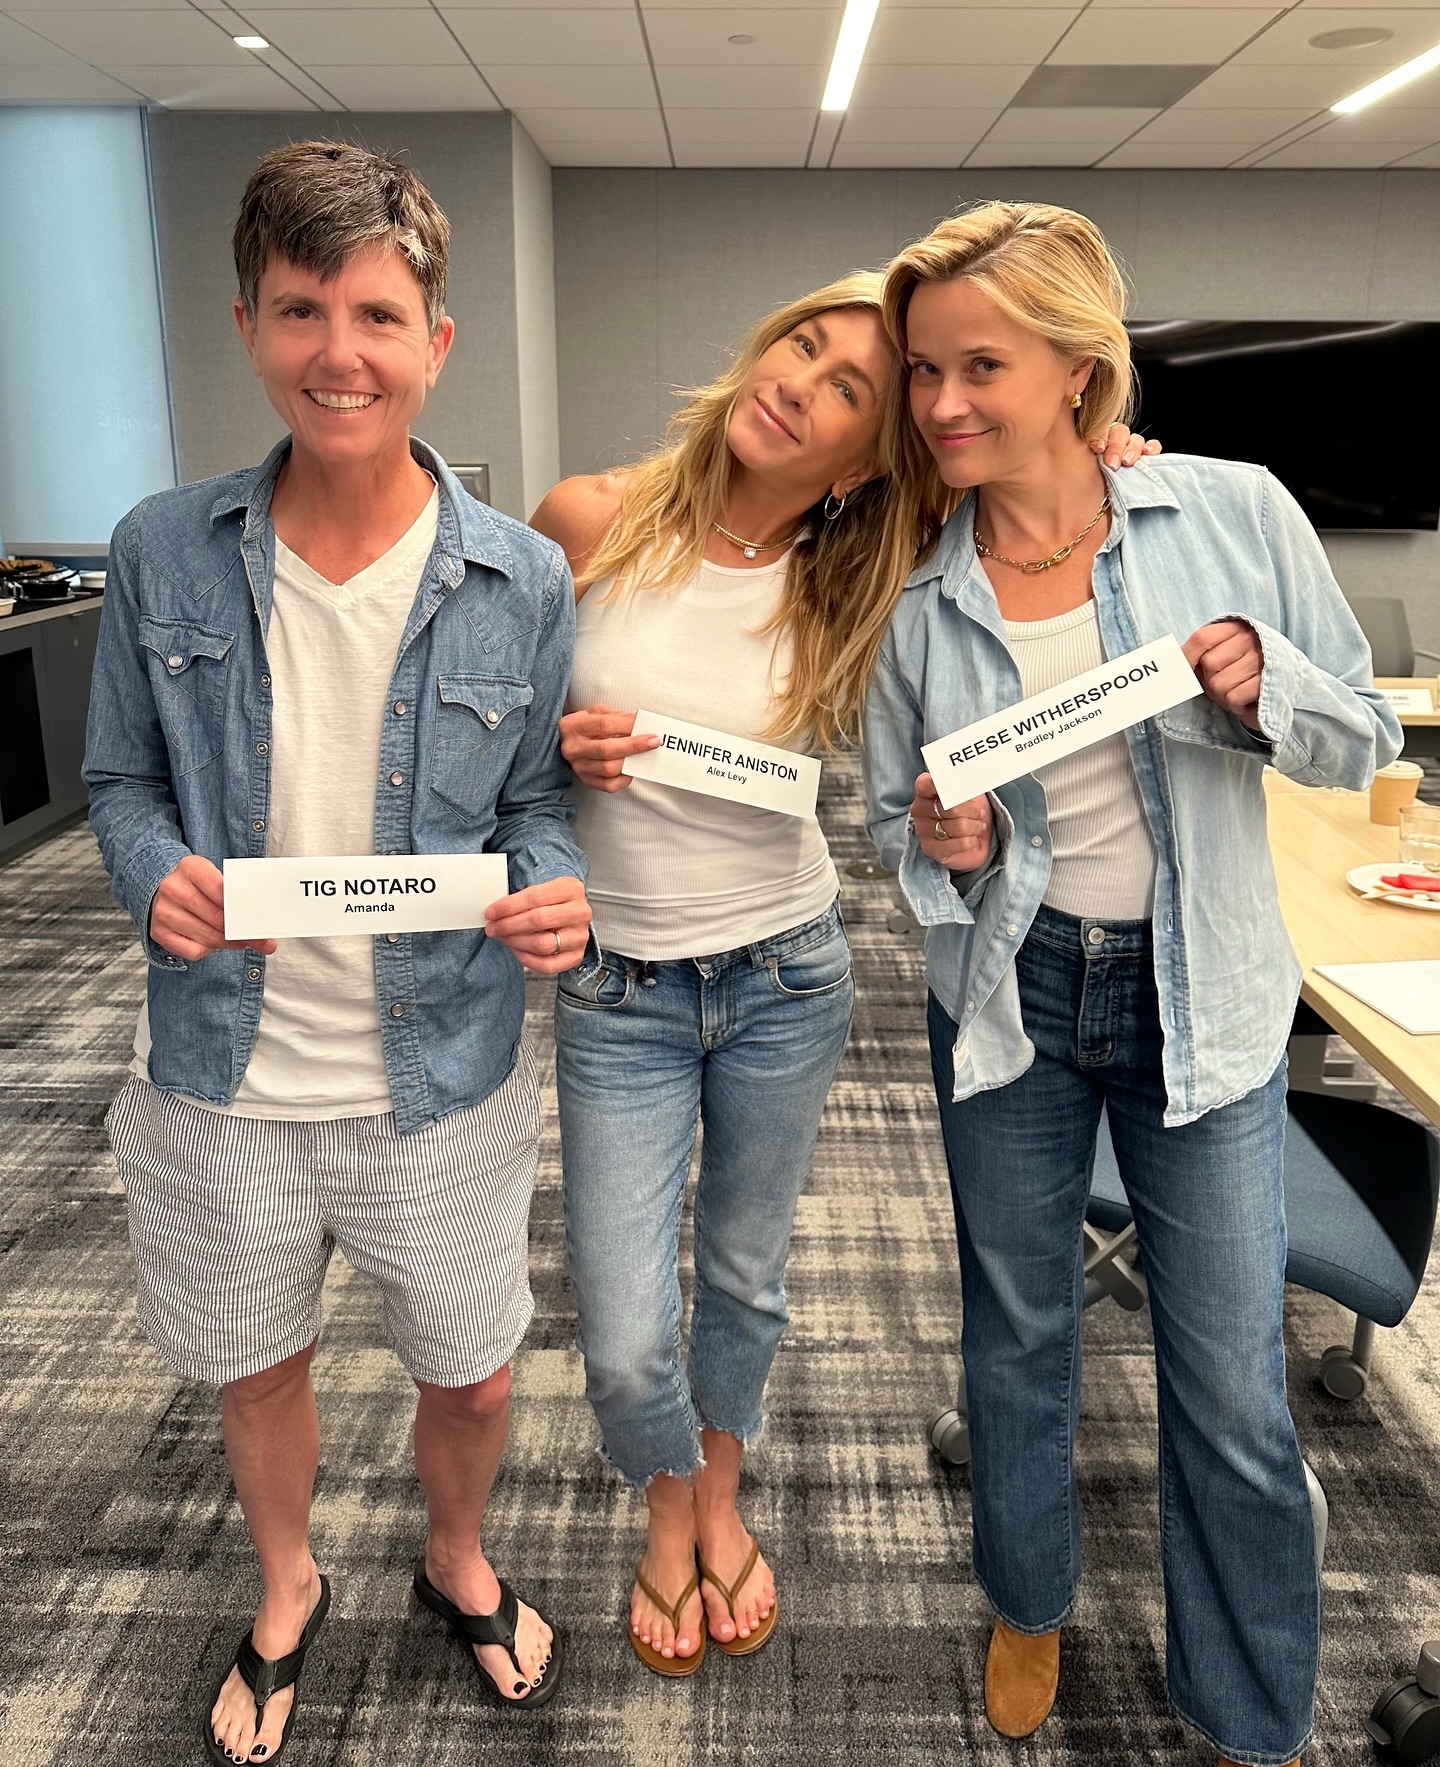 Jennifer Aniston, Tig Notaro, and Reese Witherspoon displaying the The Morning Show Season 4 script